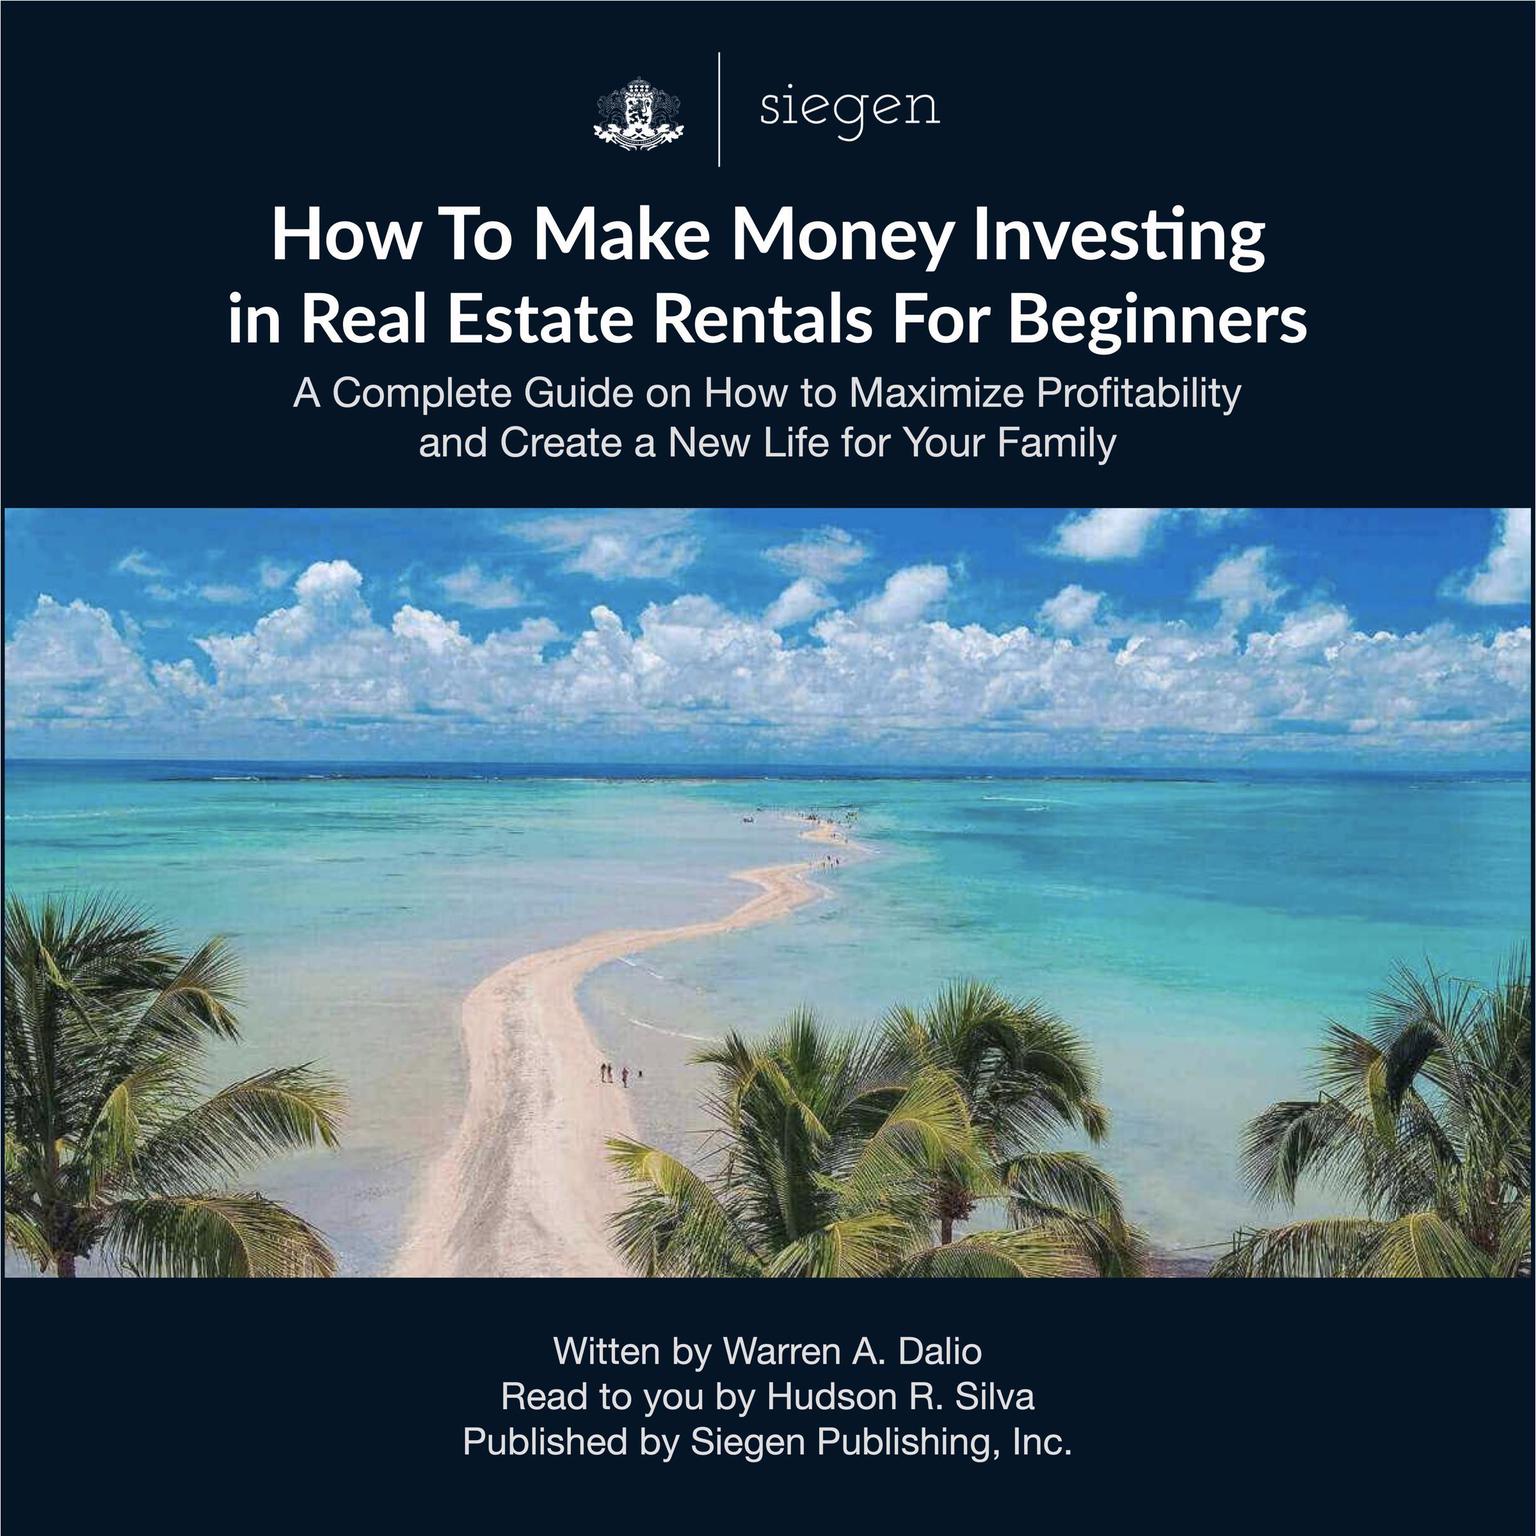 How to Make Money Investing in Real Estate Rentals For Beginners: A Complete Guide on How to Maximize Profitability and Create a New Life for Your Family Audiobook, by Warren A. Dalio